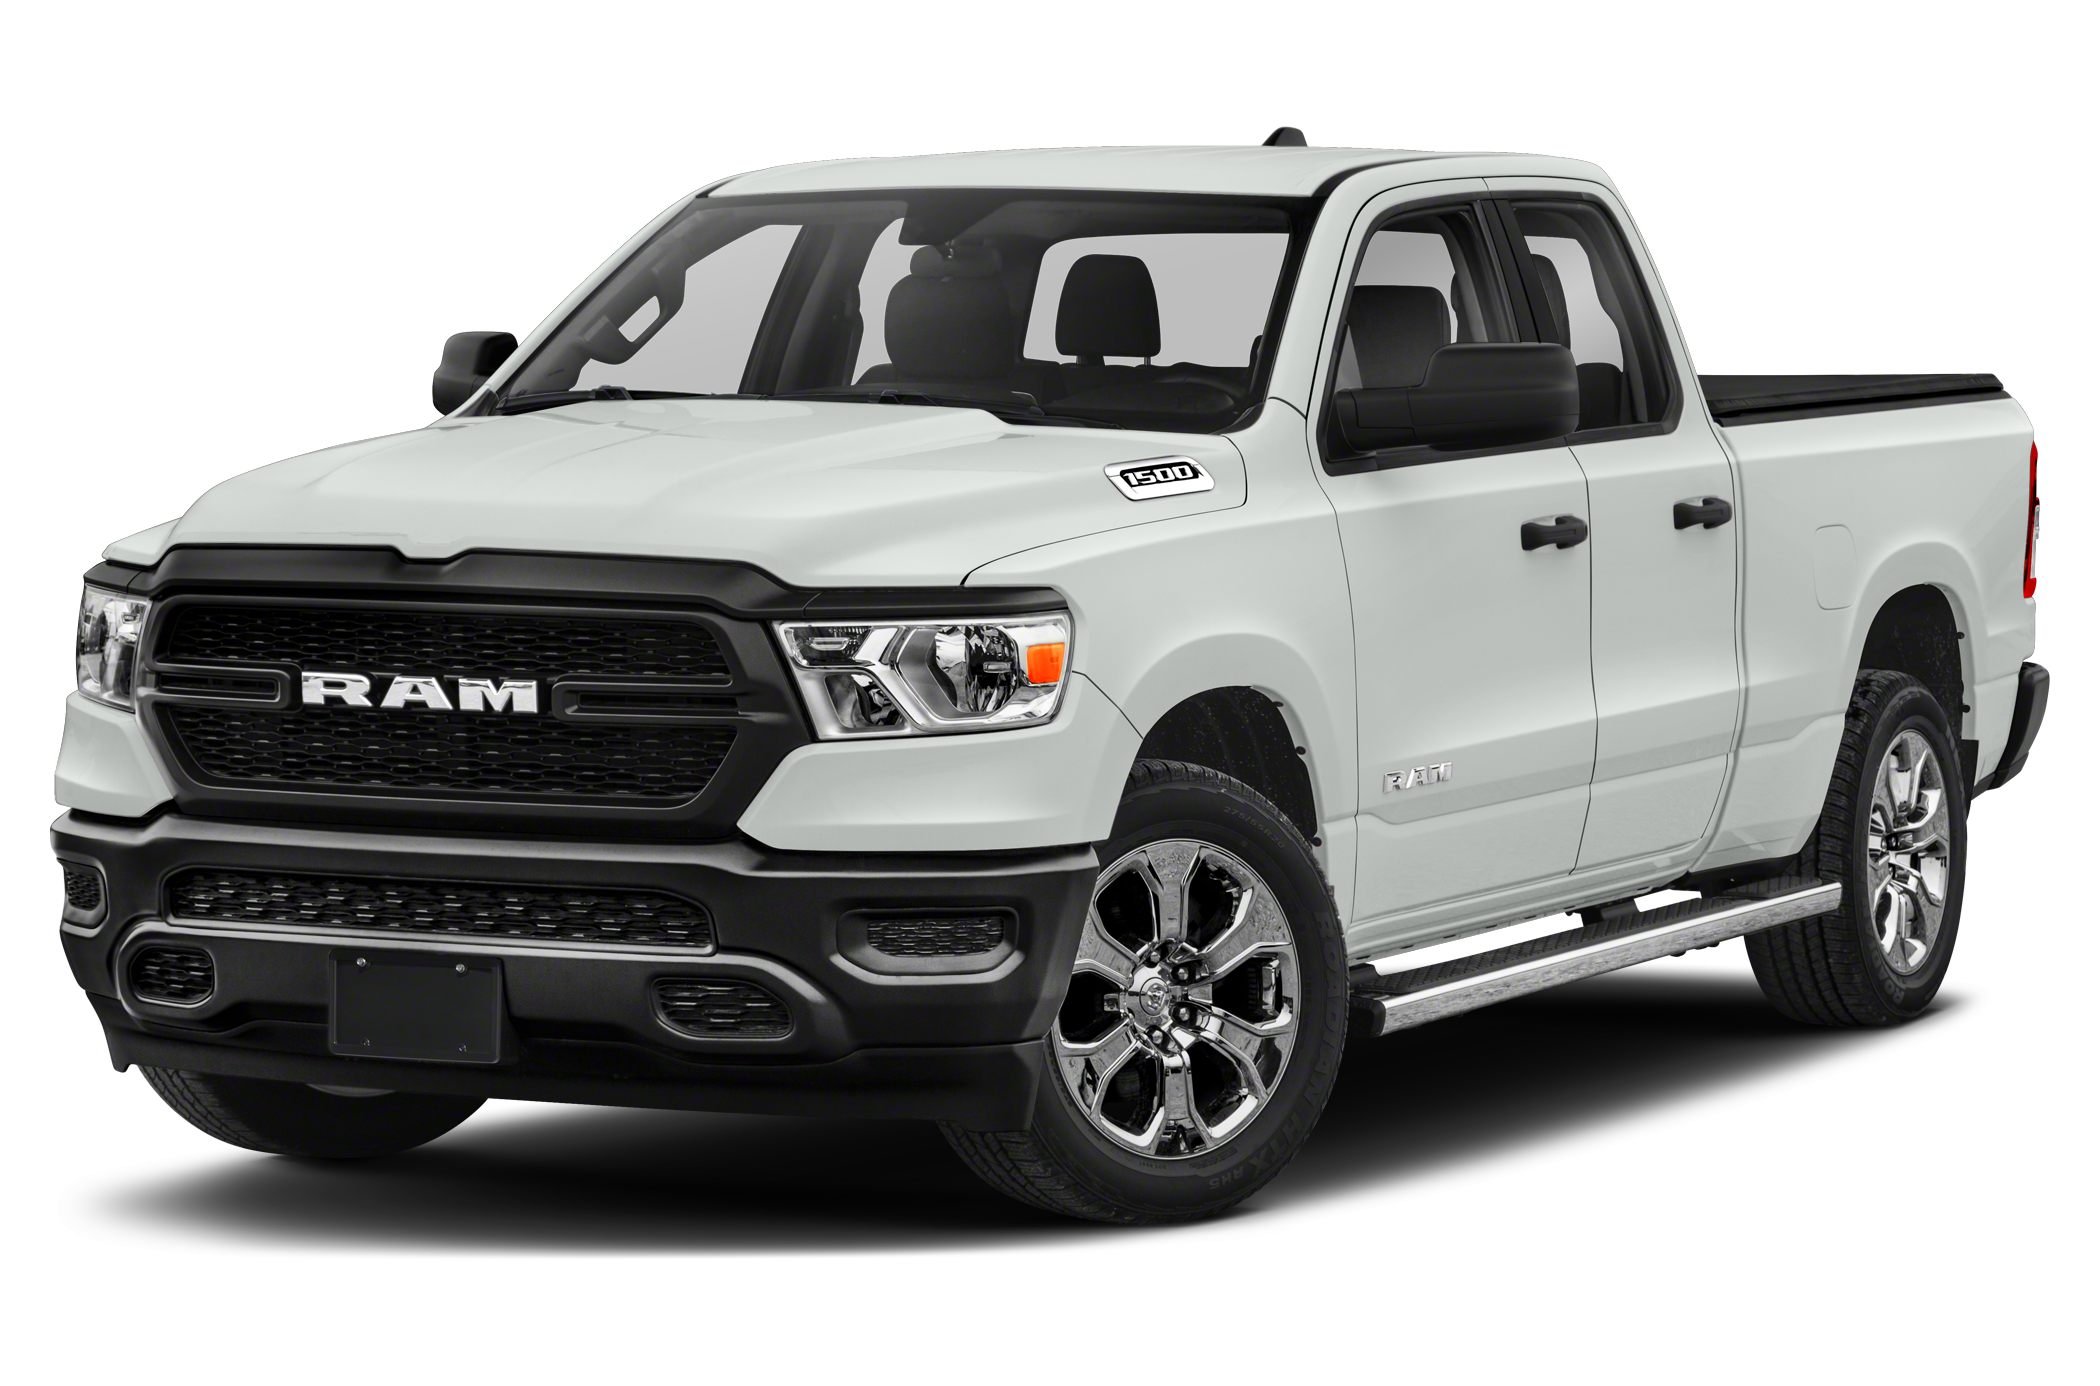 RAM 1500 Picture